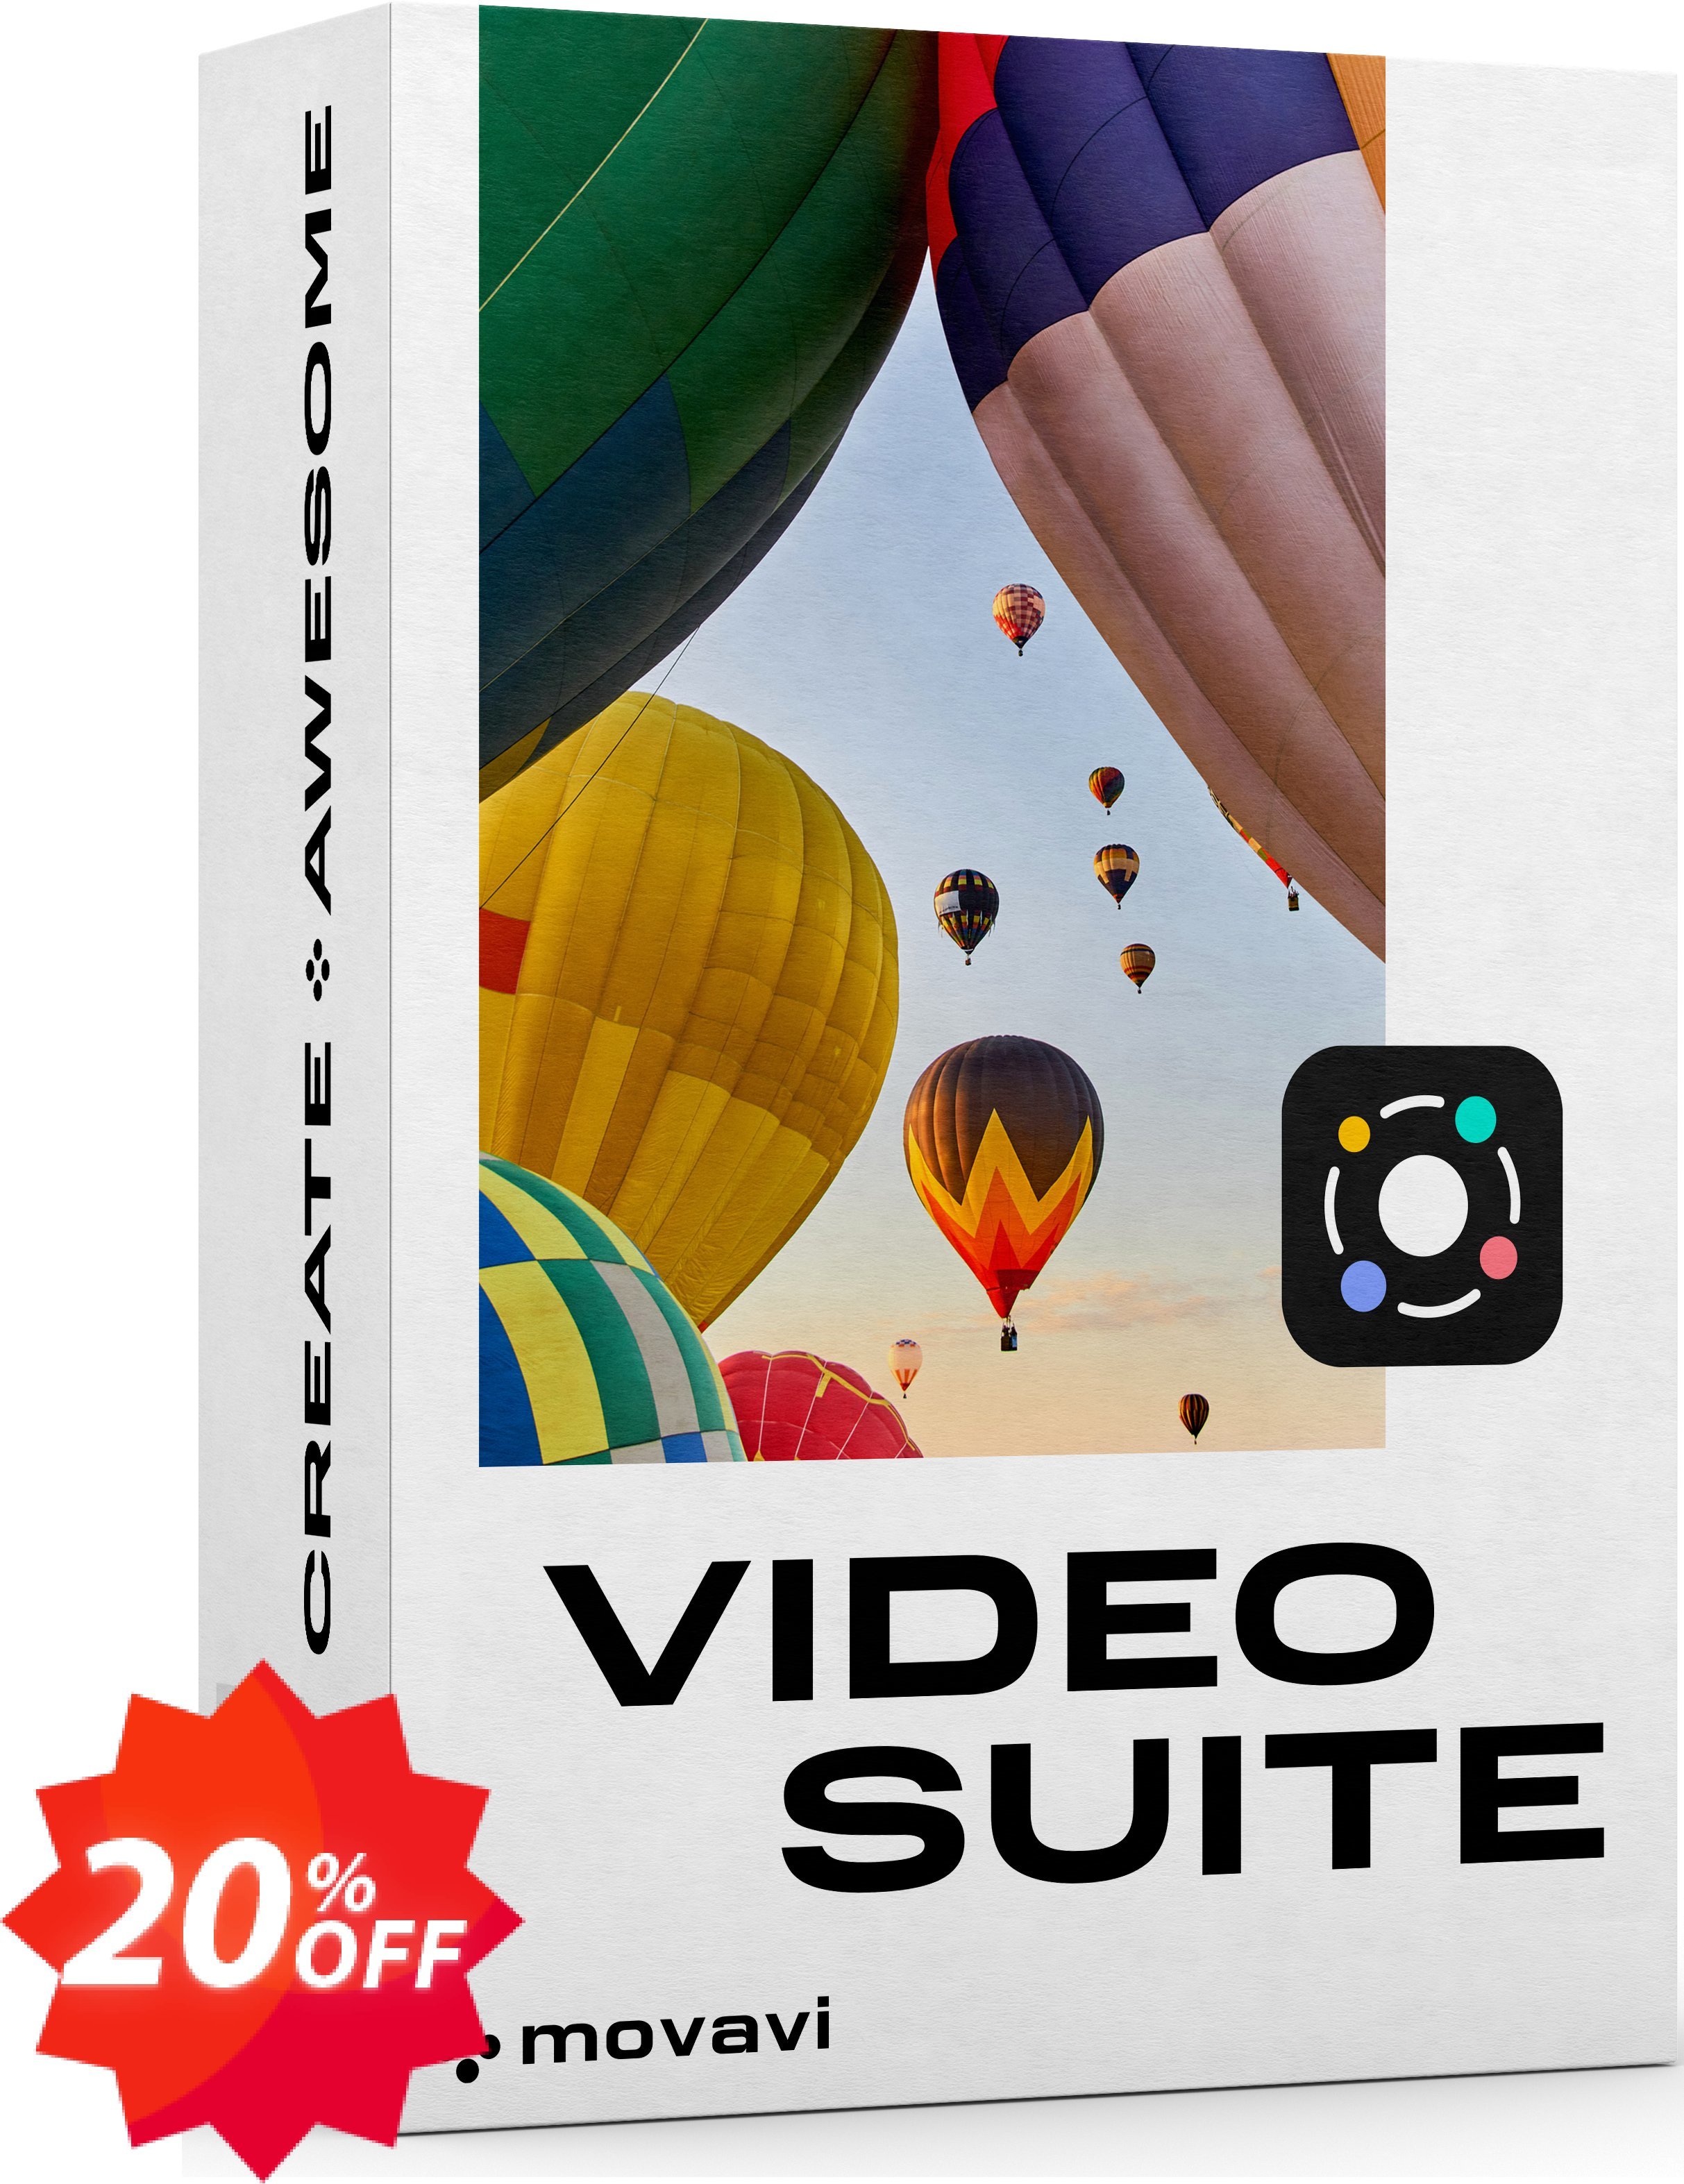 Movavi Bundle: Video Suite + Shapes and Lines Pack Coupon code 20% discount 